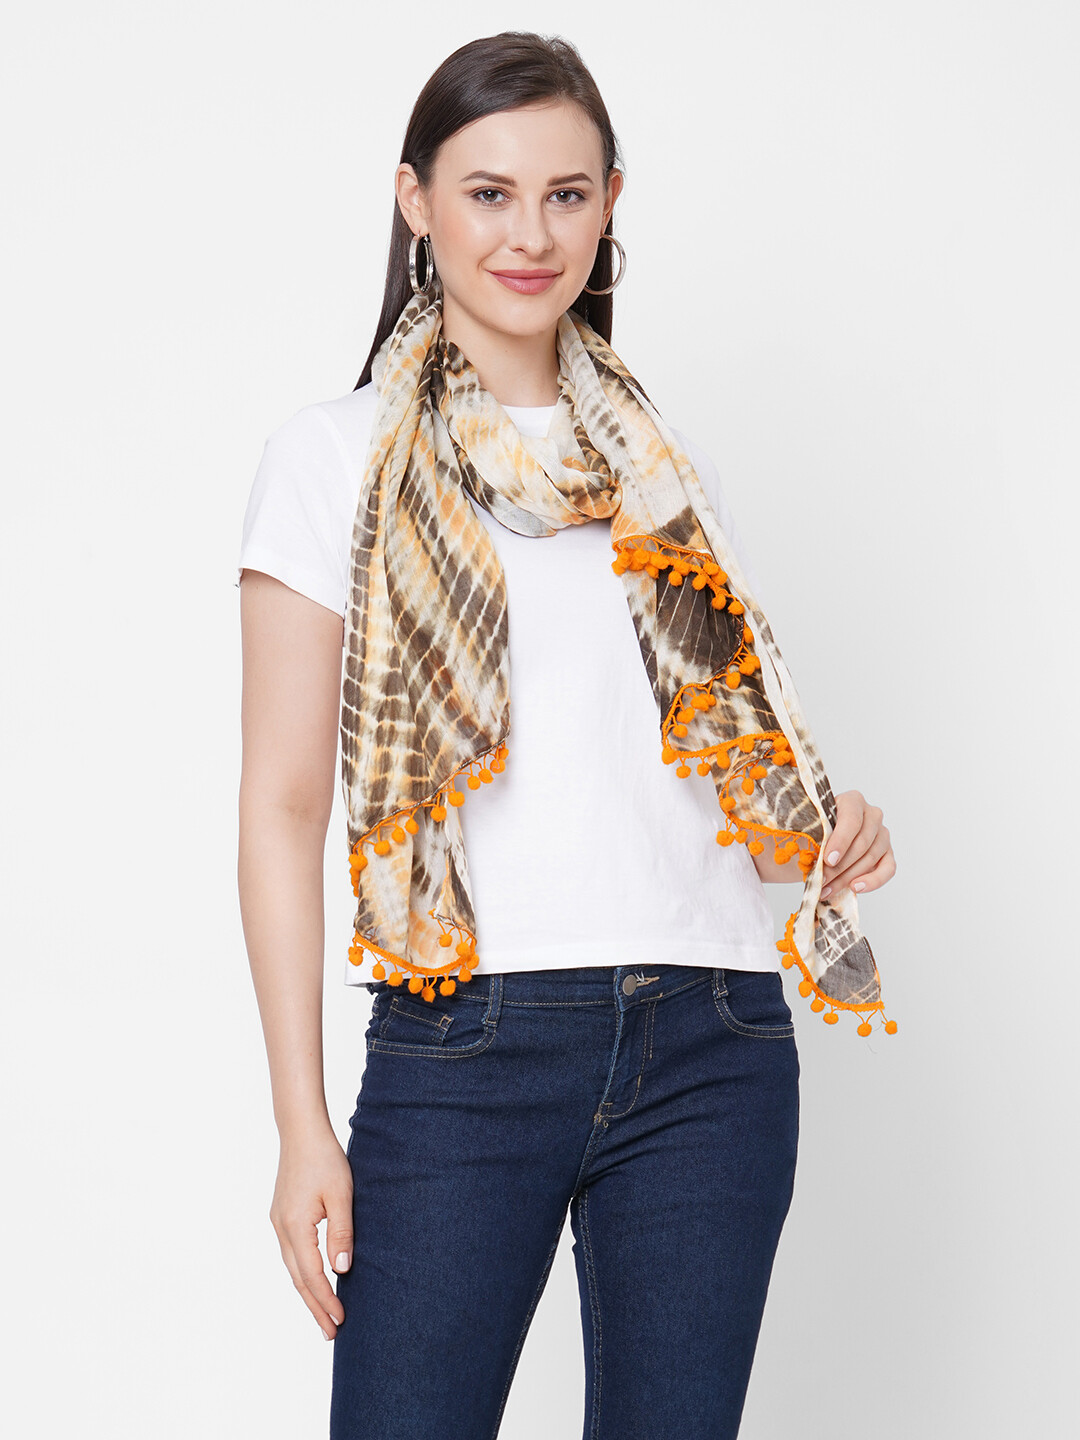 Large rayon Tie-Dye Scarves with Poms